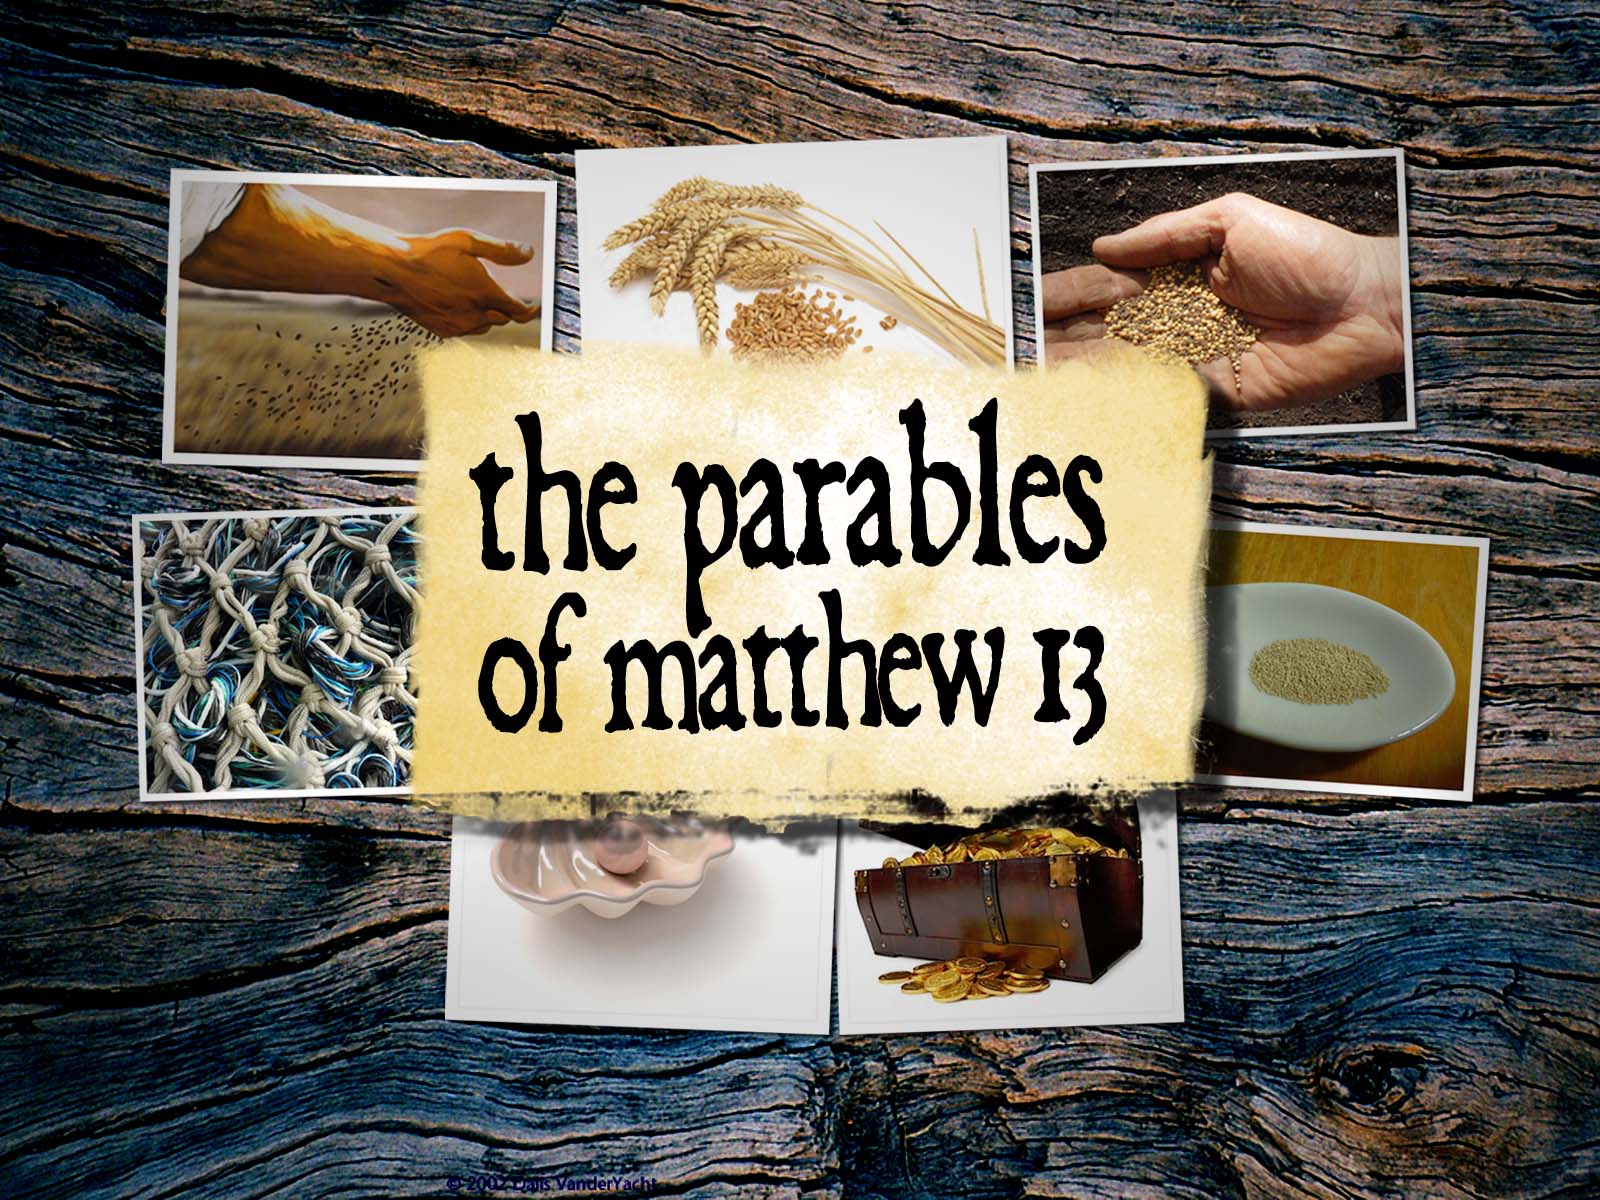 Uncovering the Hidden Meanings of Biblical Parables